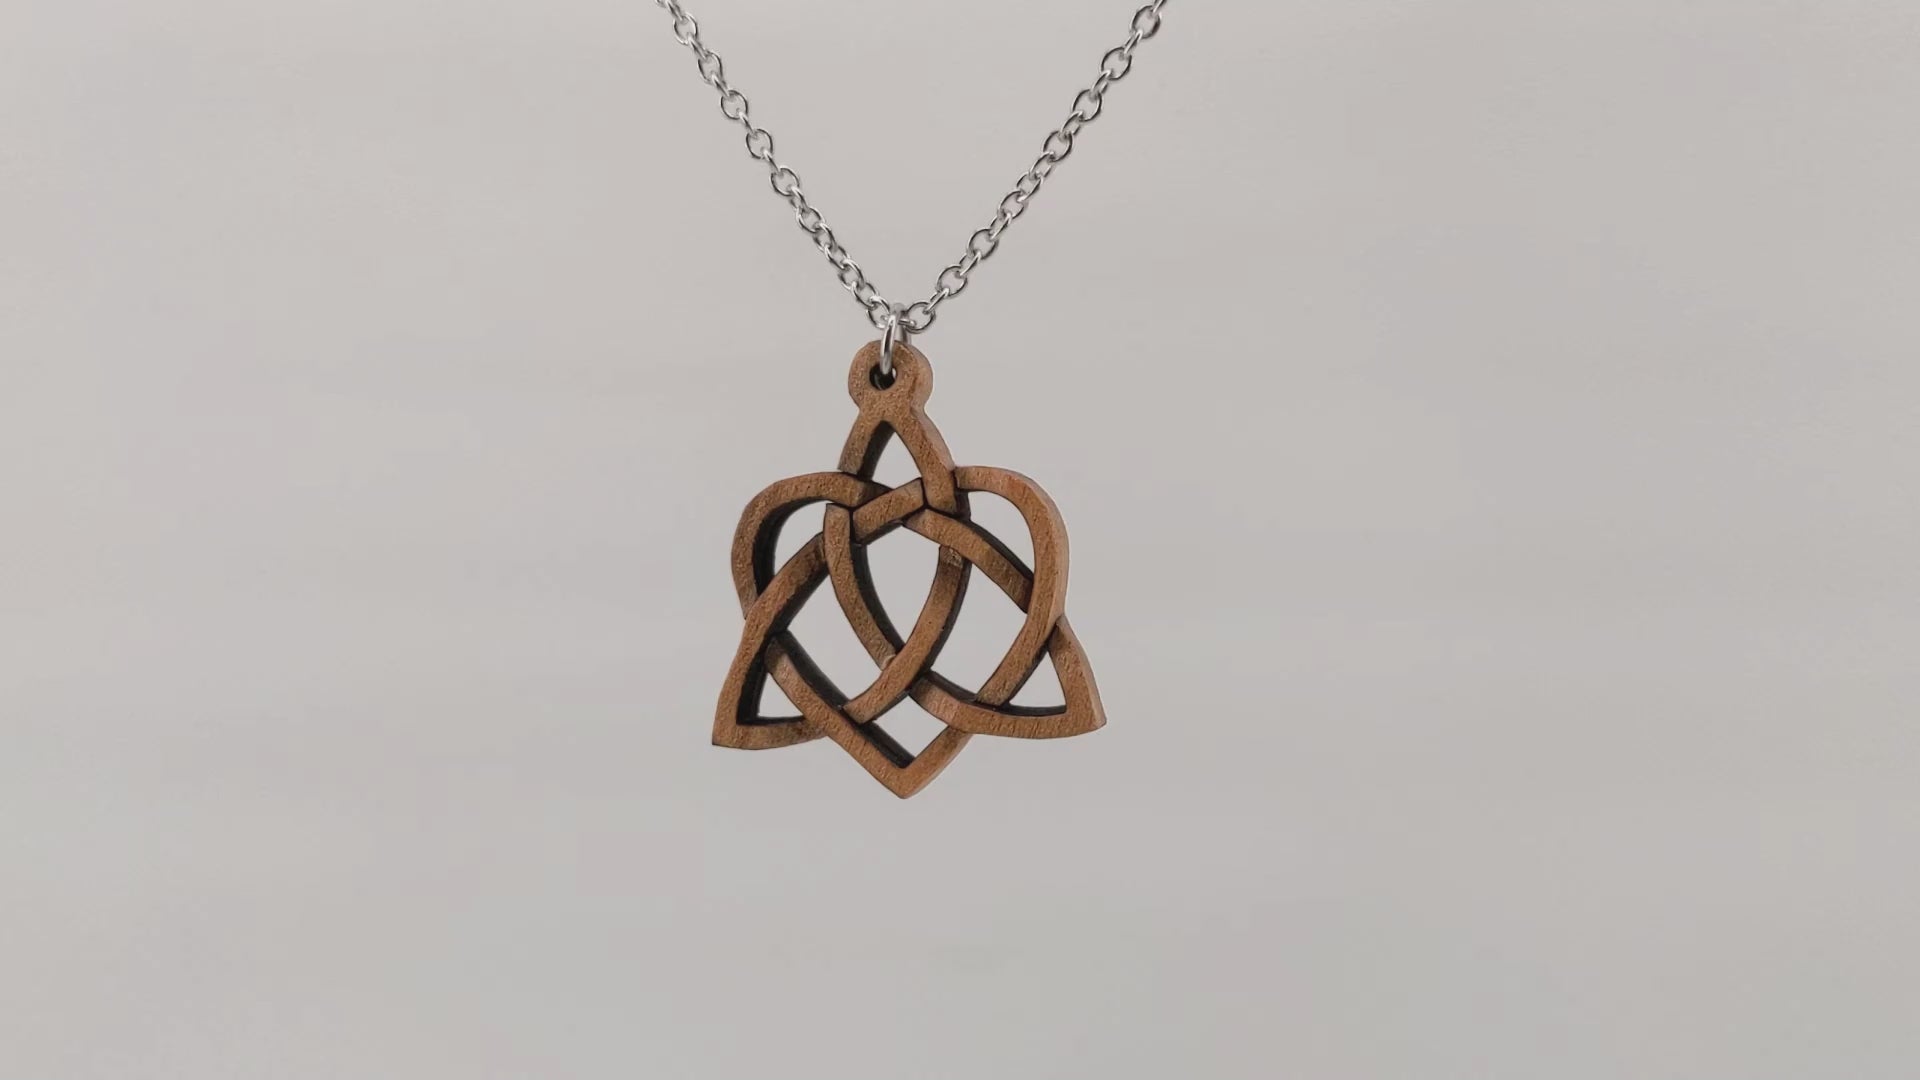 Wooden necklace pendant created in the style of a Celtic weave pattern that is a trinity and heart combined. The symbol represents adoption. Hanging and rotating from a silver stainless steel chain against a white background.